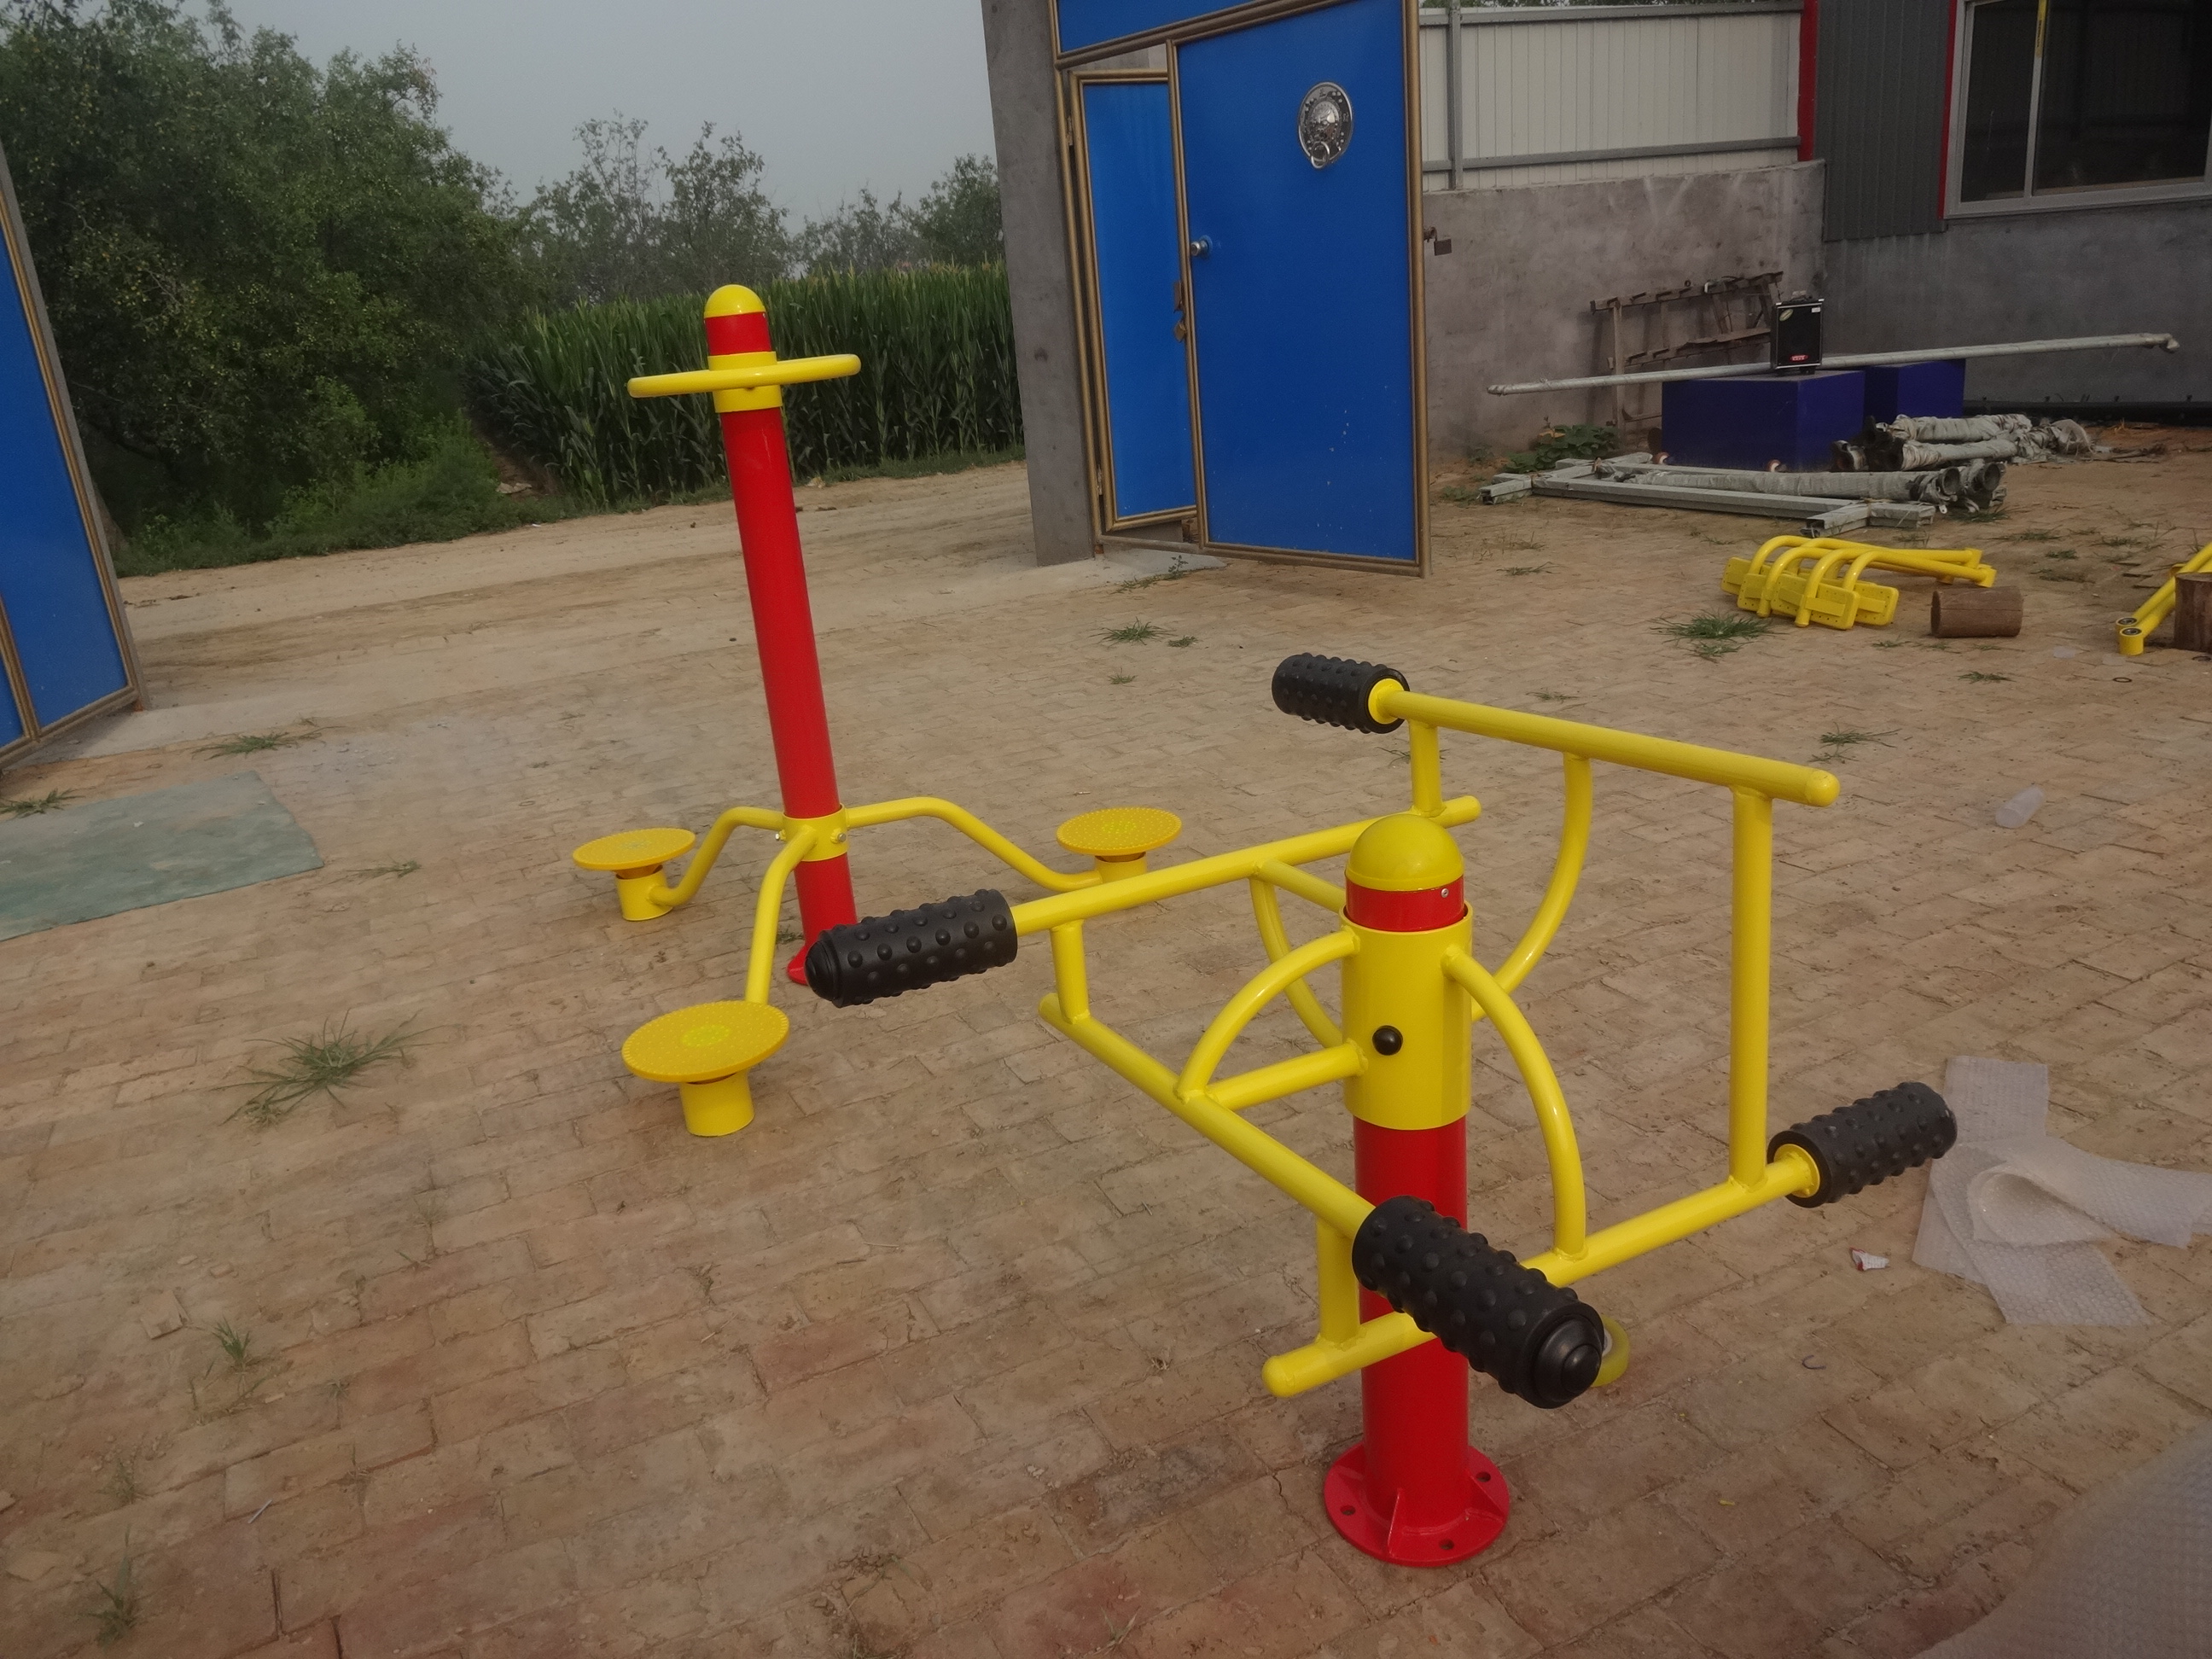 National Fitness Outdoor Park Square Stadium Fitness School Path Fitness Equipment Inverted Stand